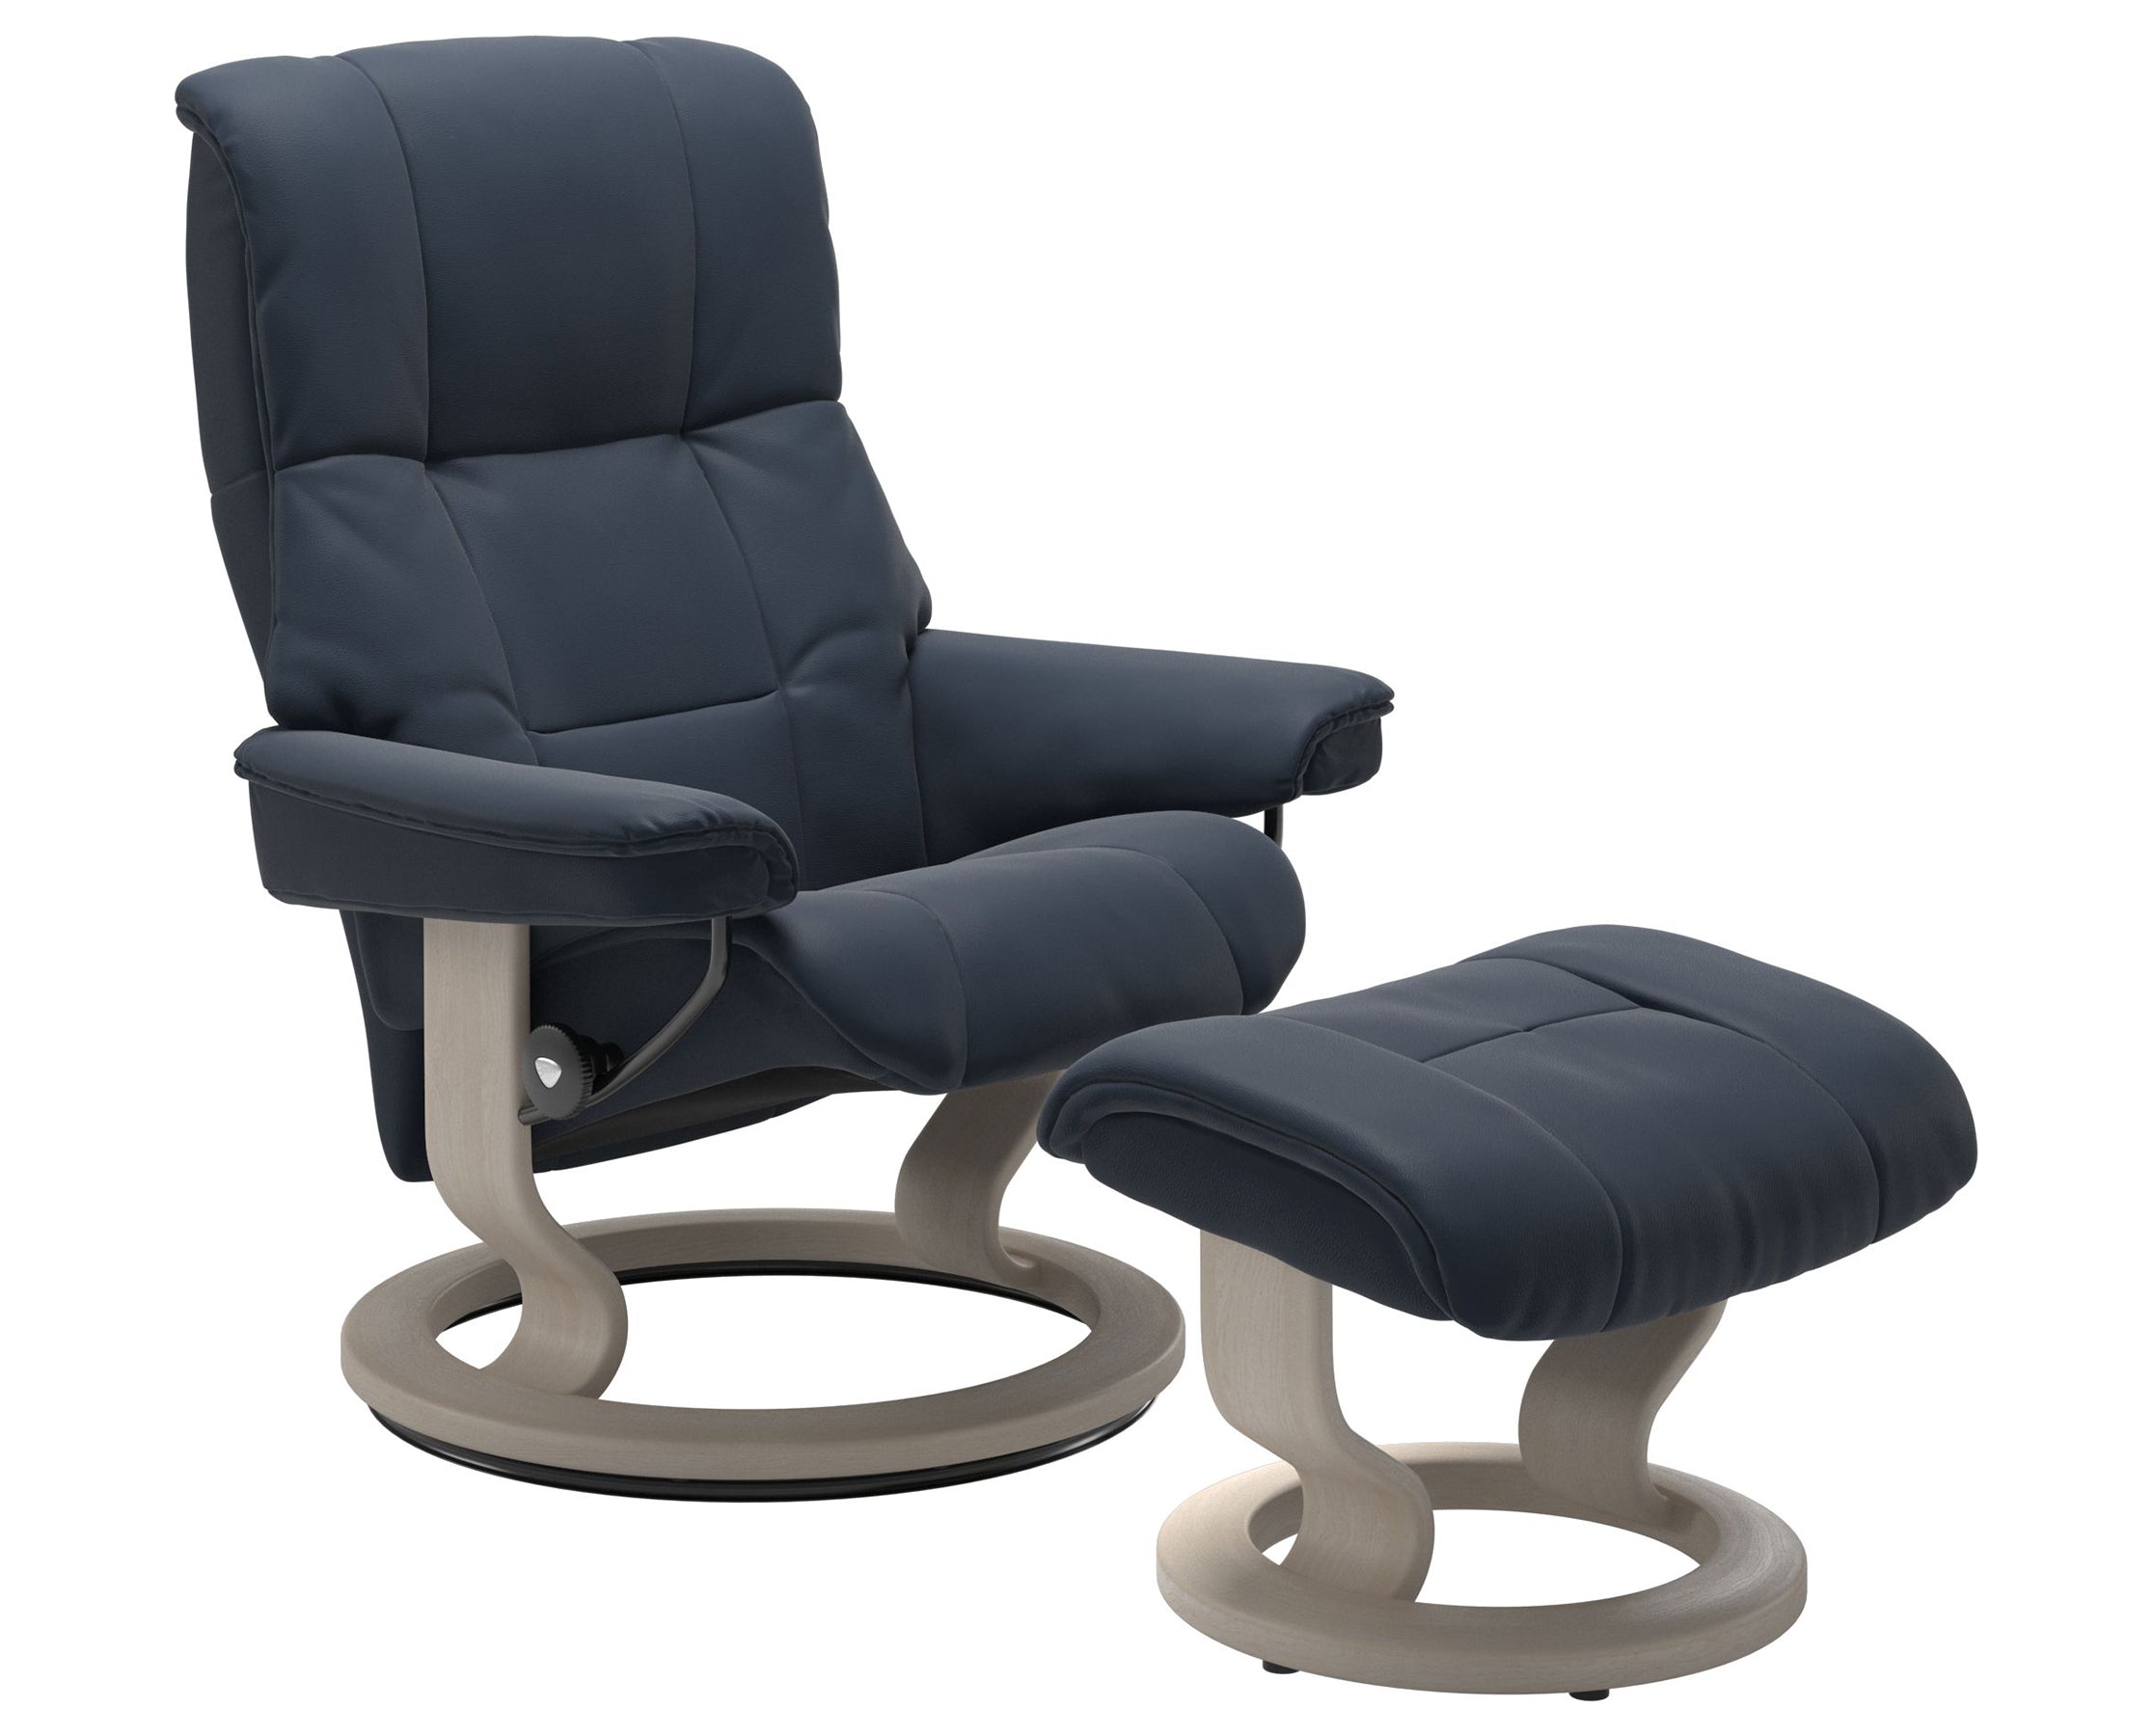 Paloma Leather Oxford Blue S/M/L and Whitewash Base | Stressless Mayfair Classic Recliner | Valley Ridge Furniture